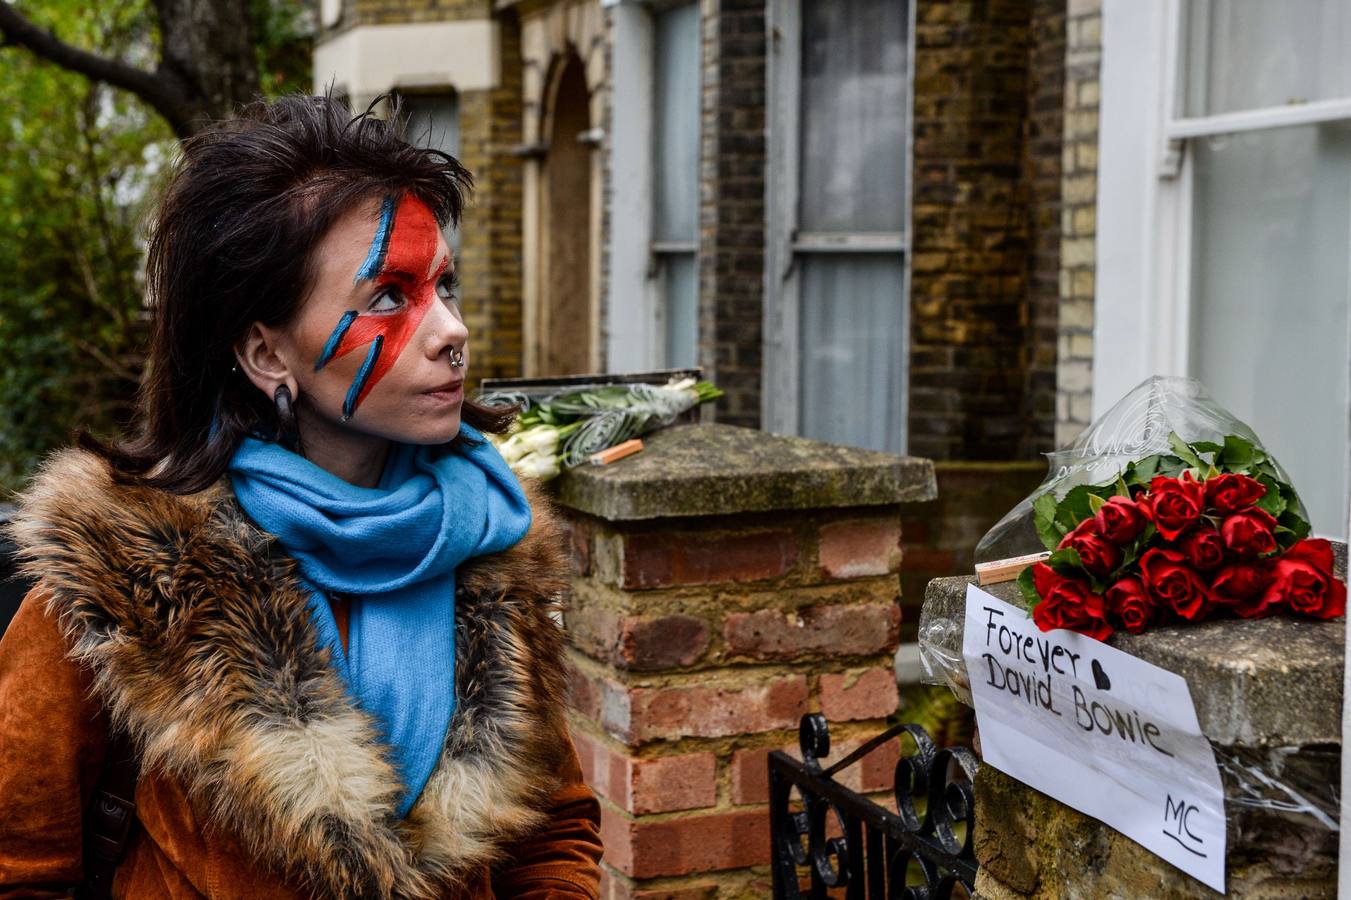 'Forever David Bowie'